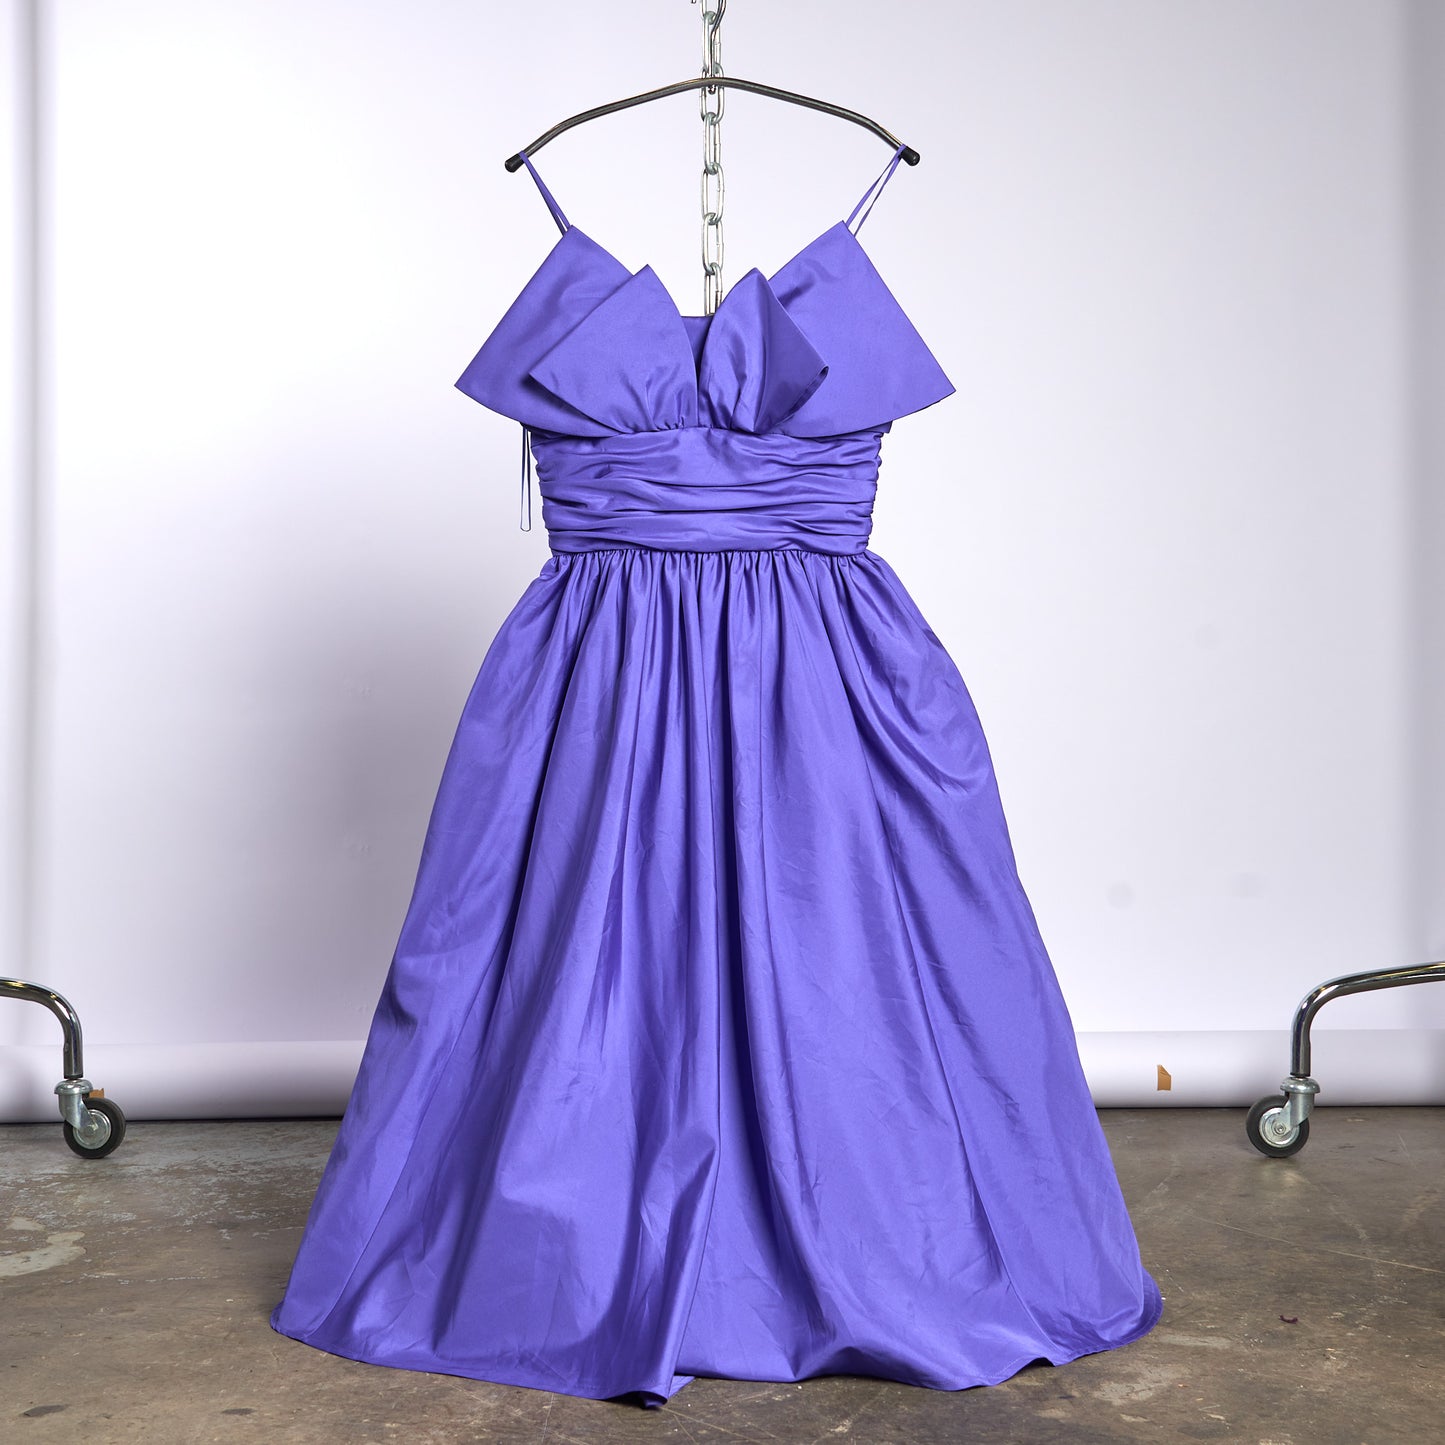 Purple Chic Dress with Big Bows on Front and Backside